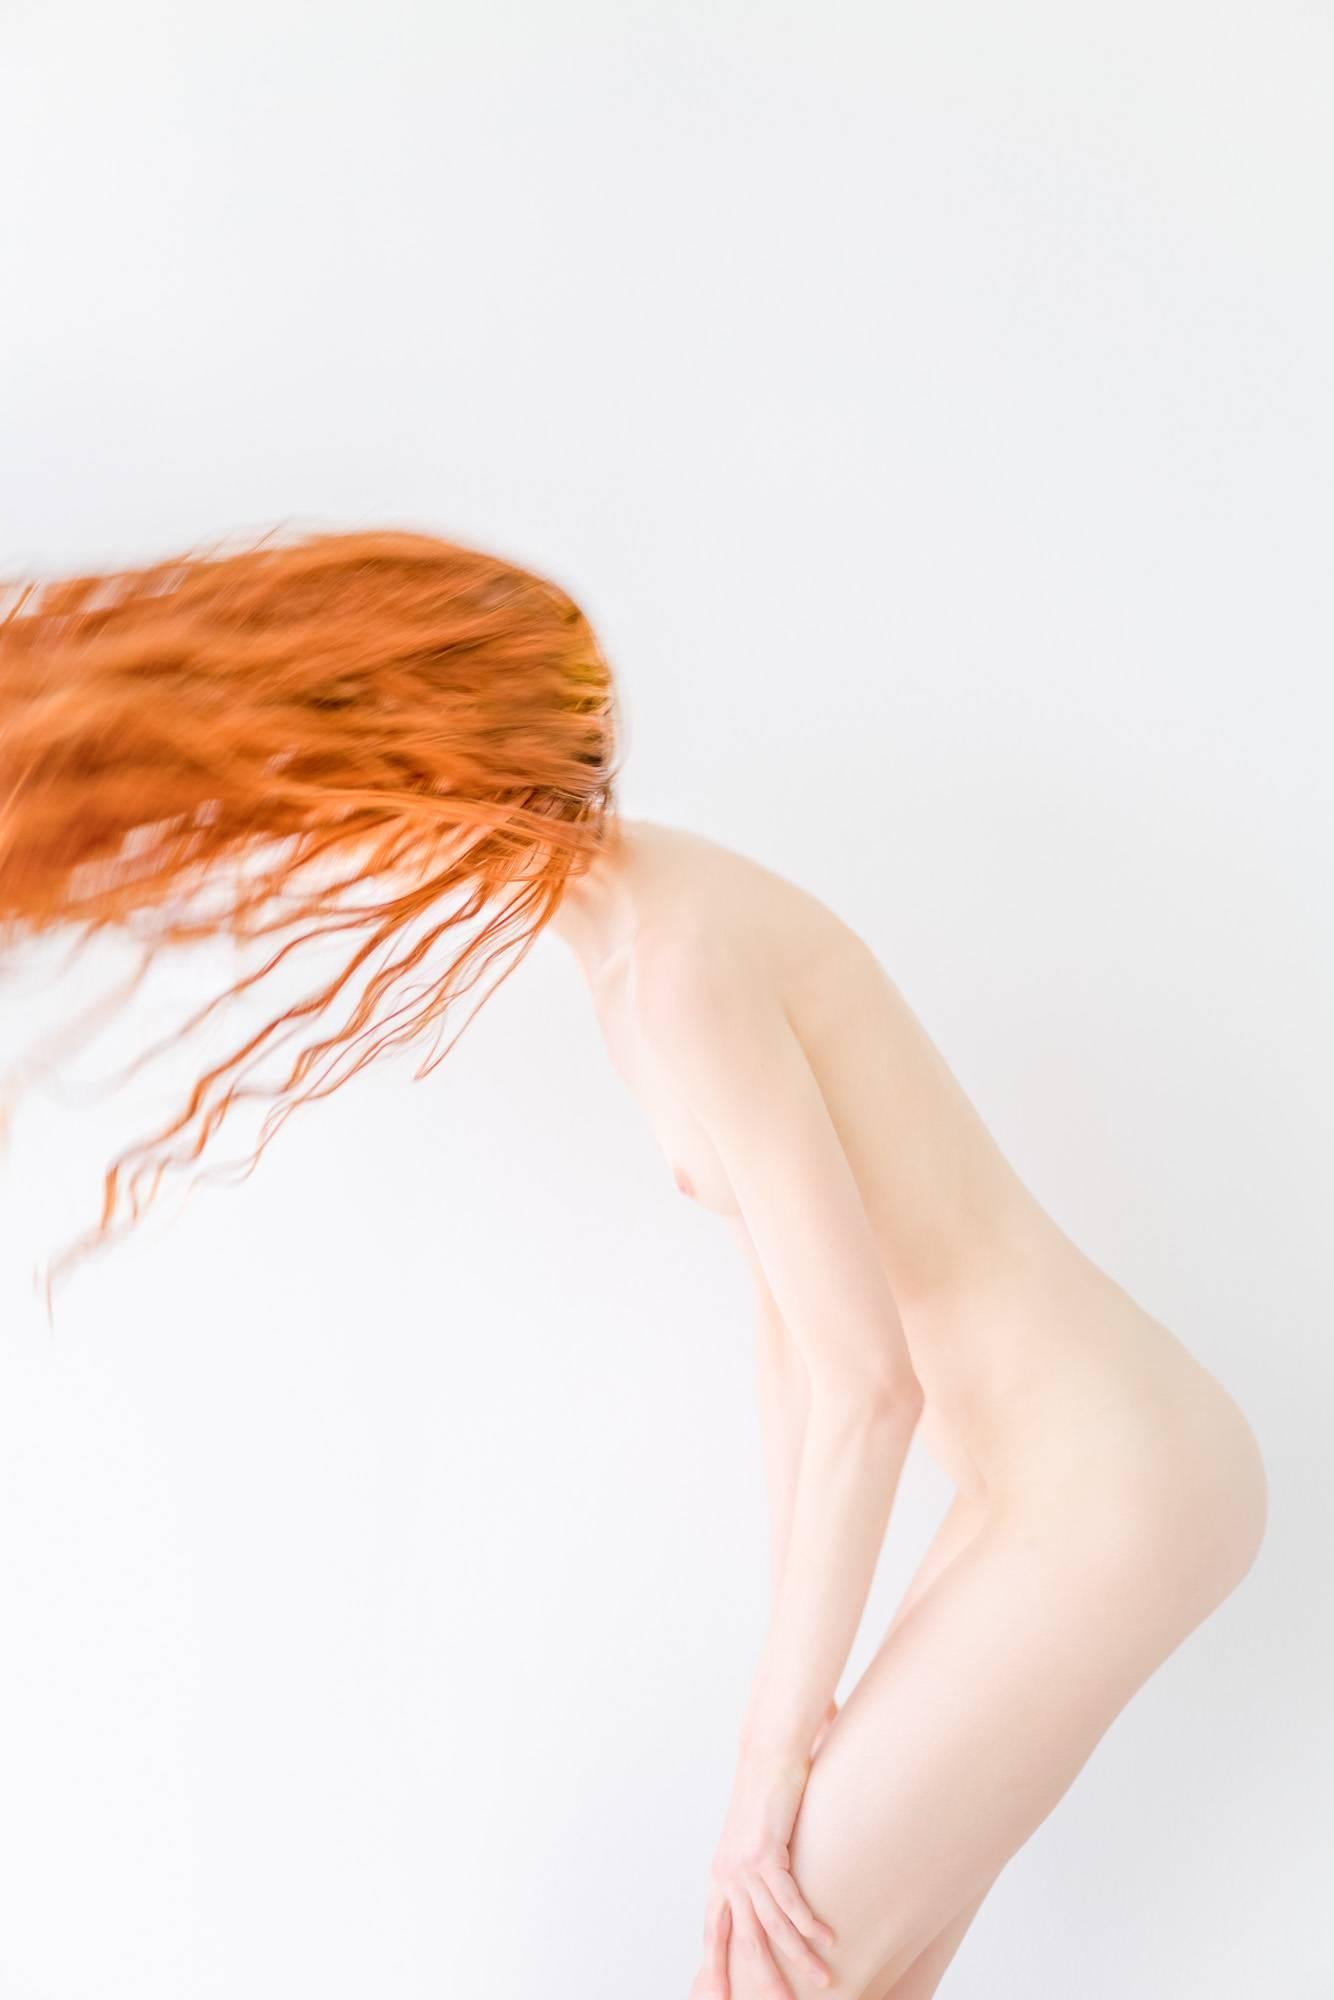 Nude Photograph David Jay - photographie rouge n°1, couleur chair